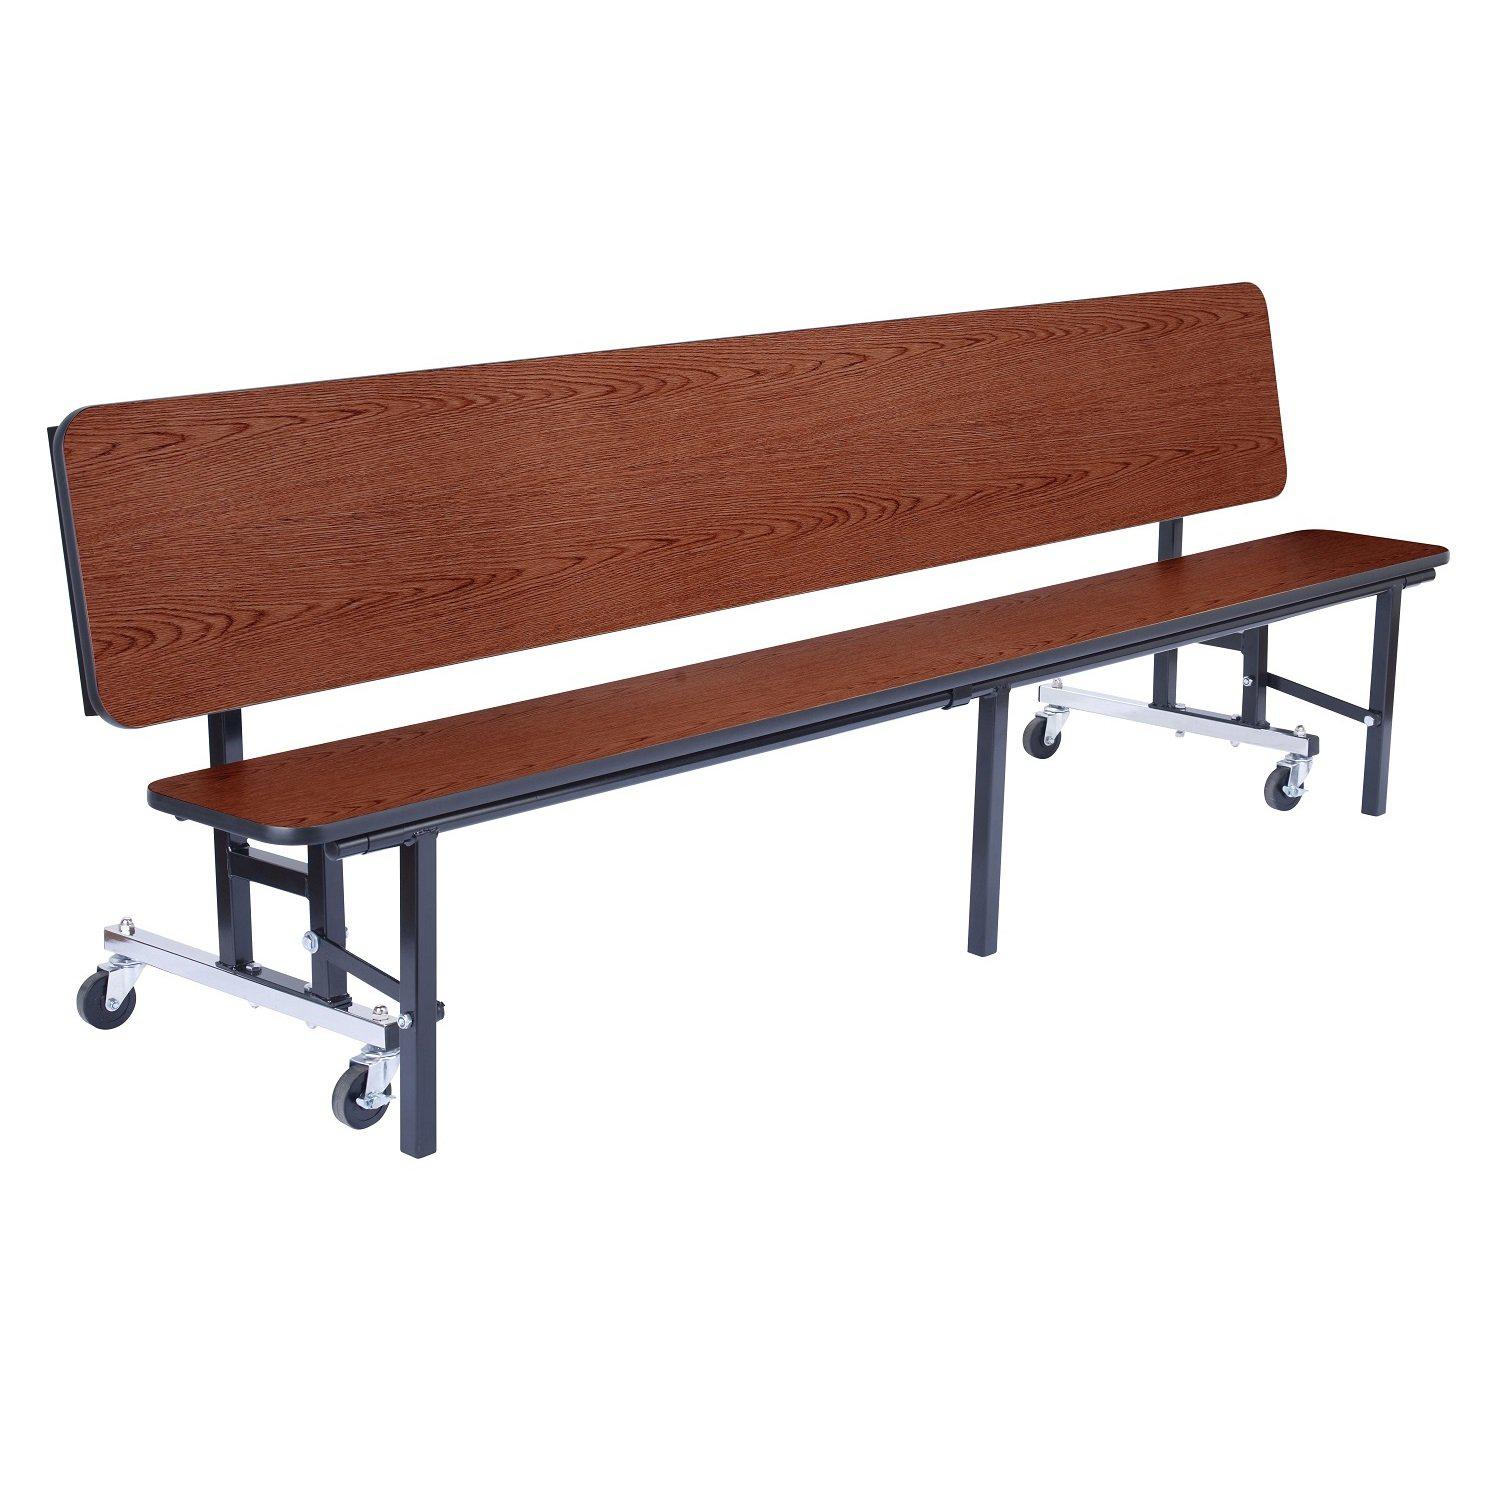 Mobile Convertible Bench Cafeteria Table, 8'L, MDF Core, Black ProtectEdge, Textured Black Frame